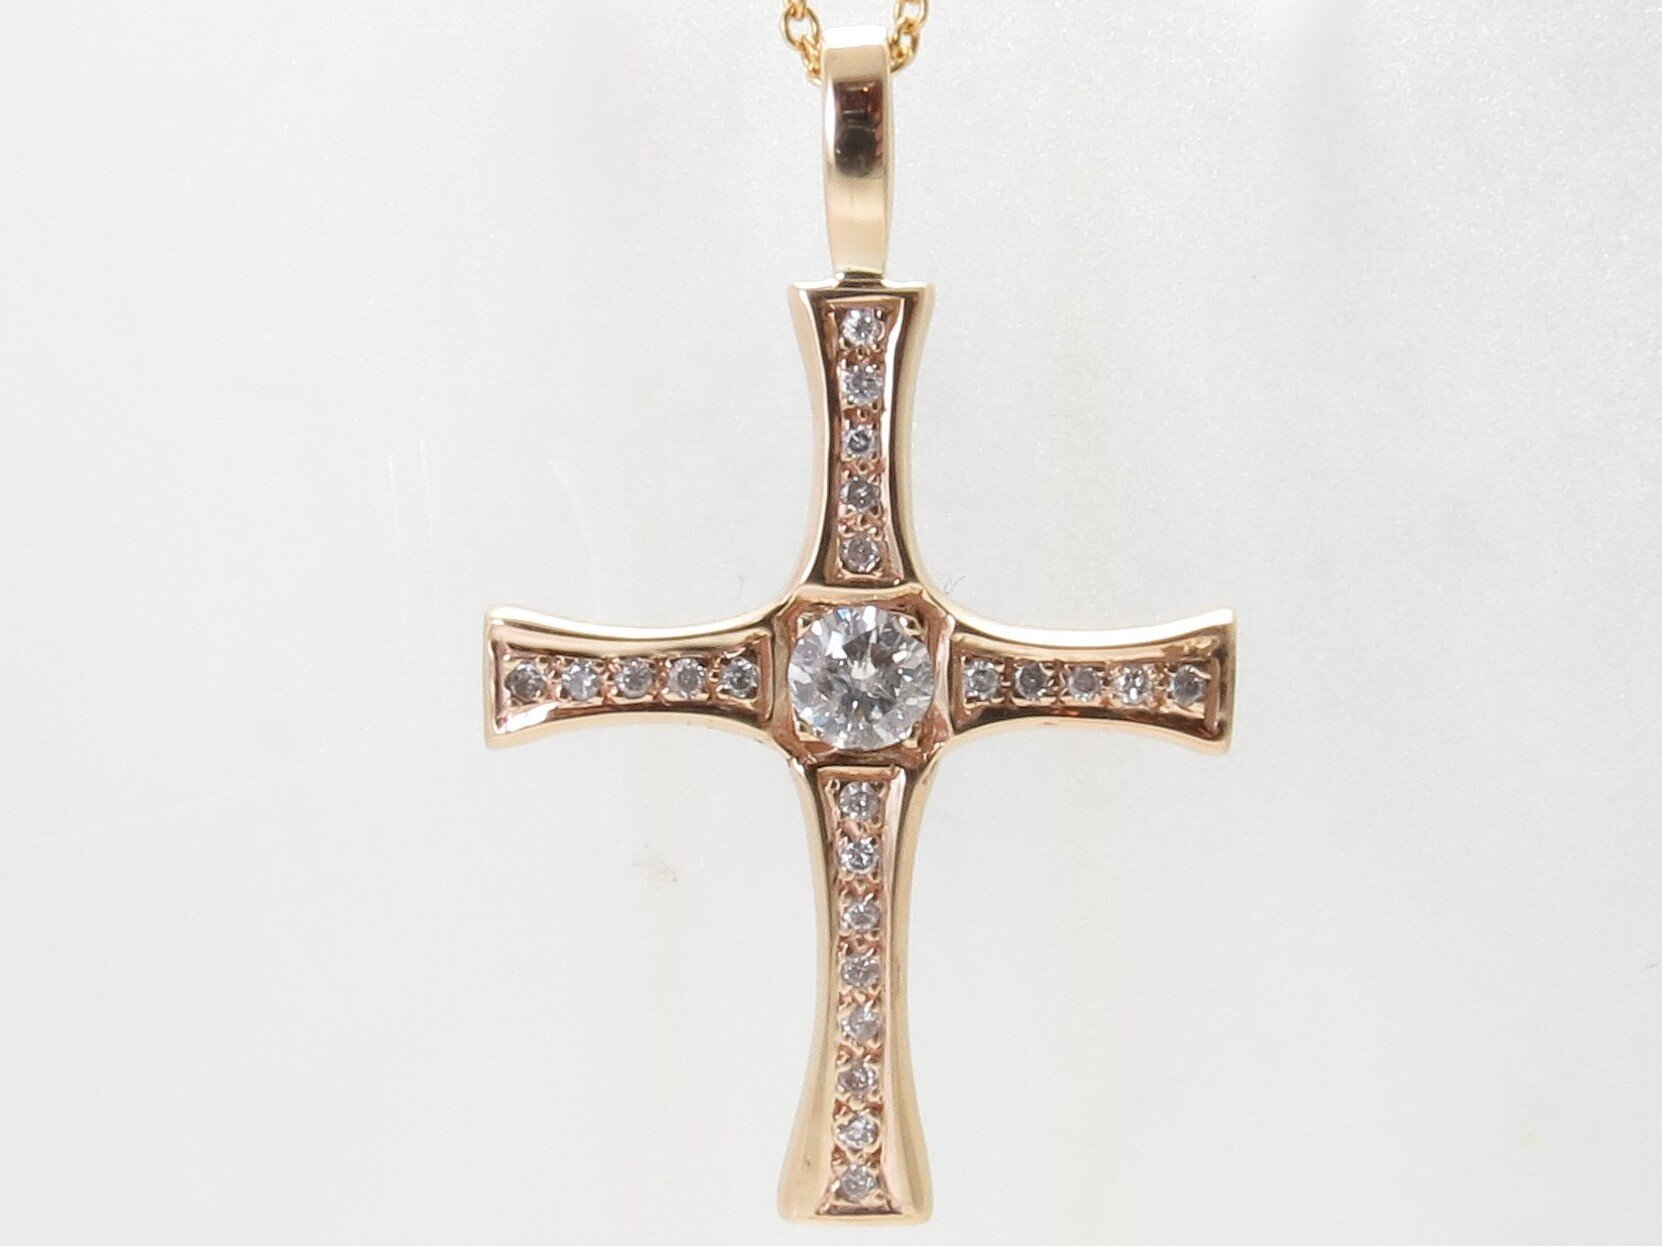 Cross Made from family wedding ring gold and heirloom diamonds